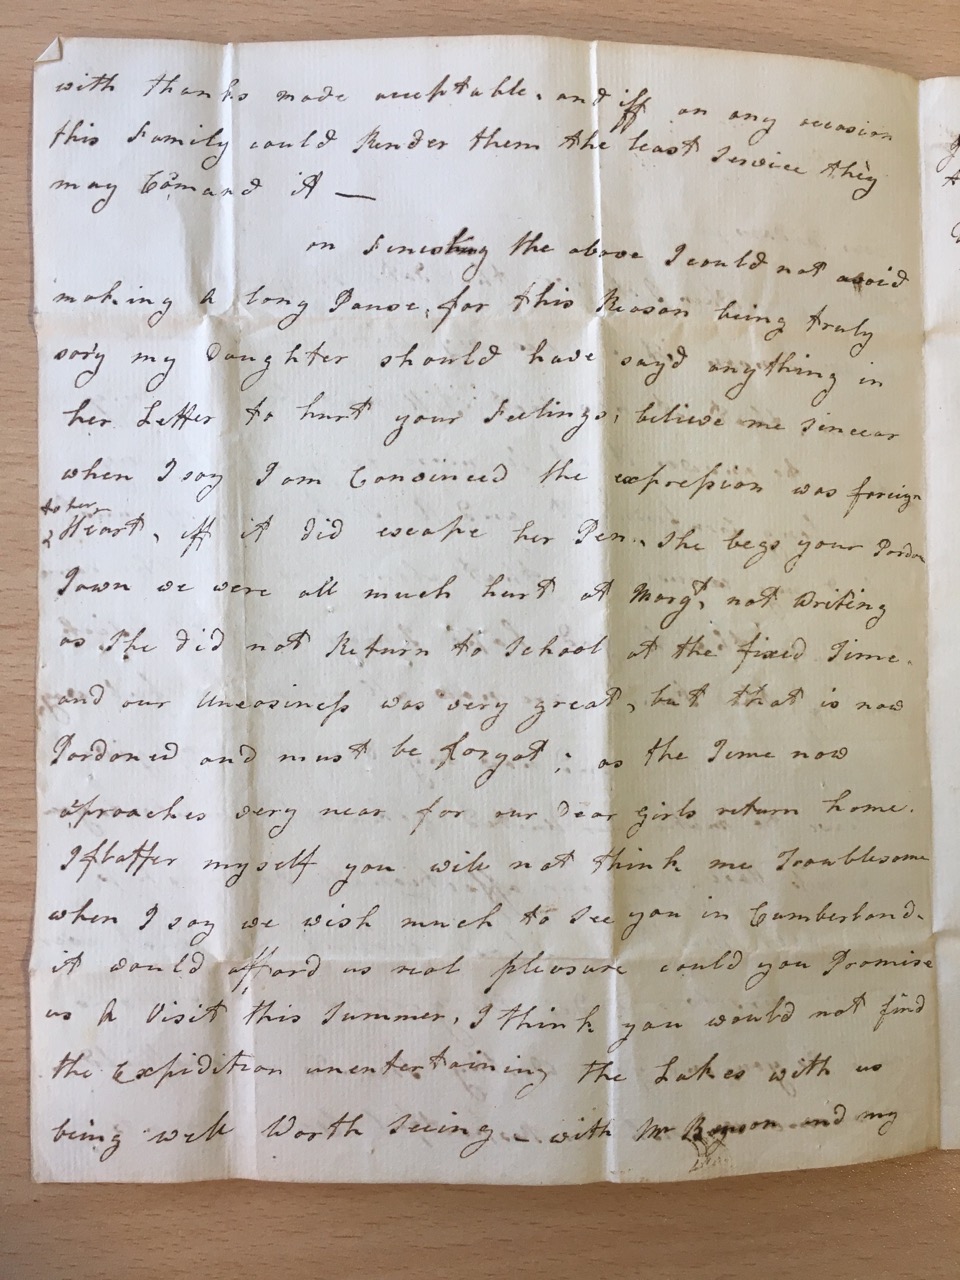 Image #2 of letter: Isabella Benson to Ann Hare, 15 April 1785